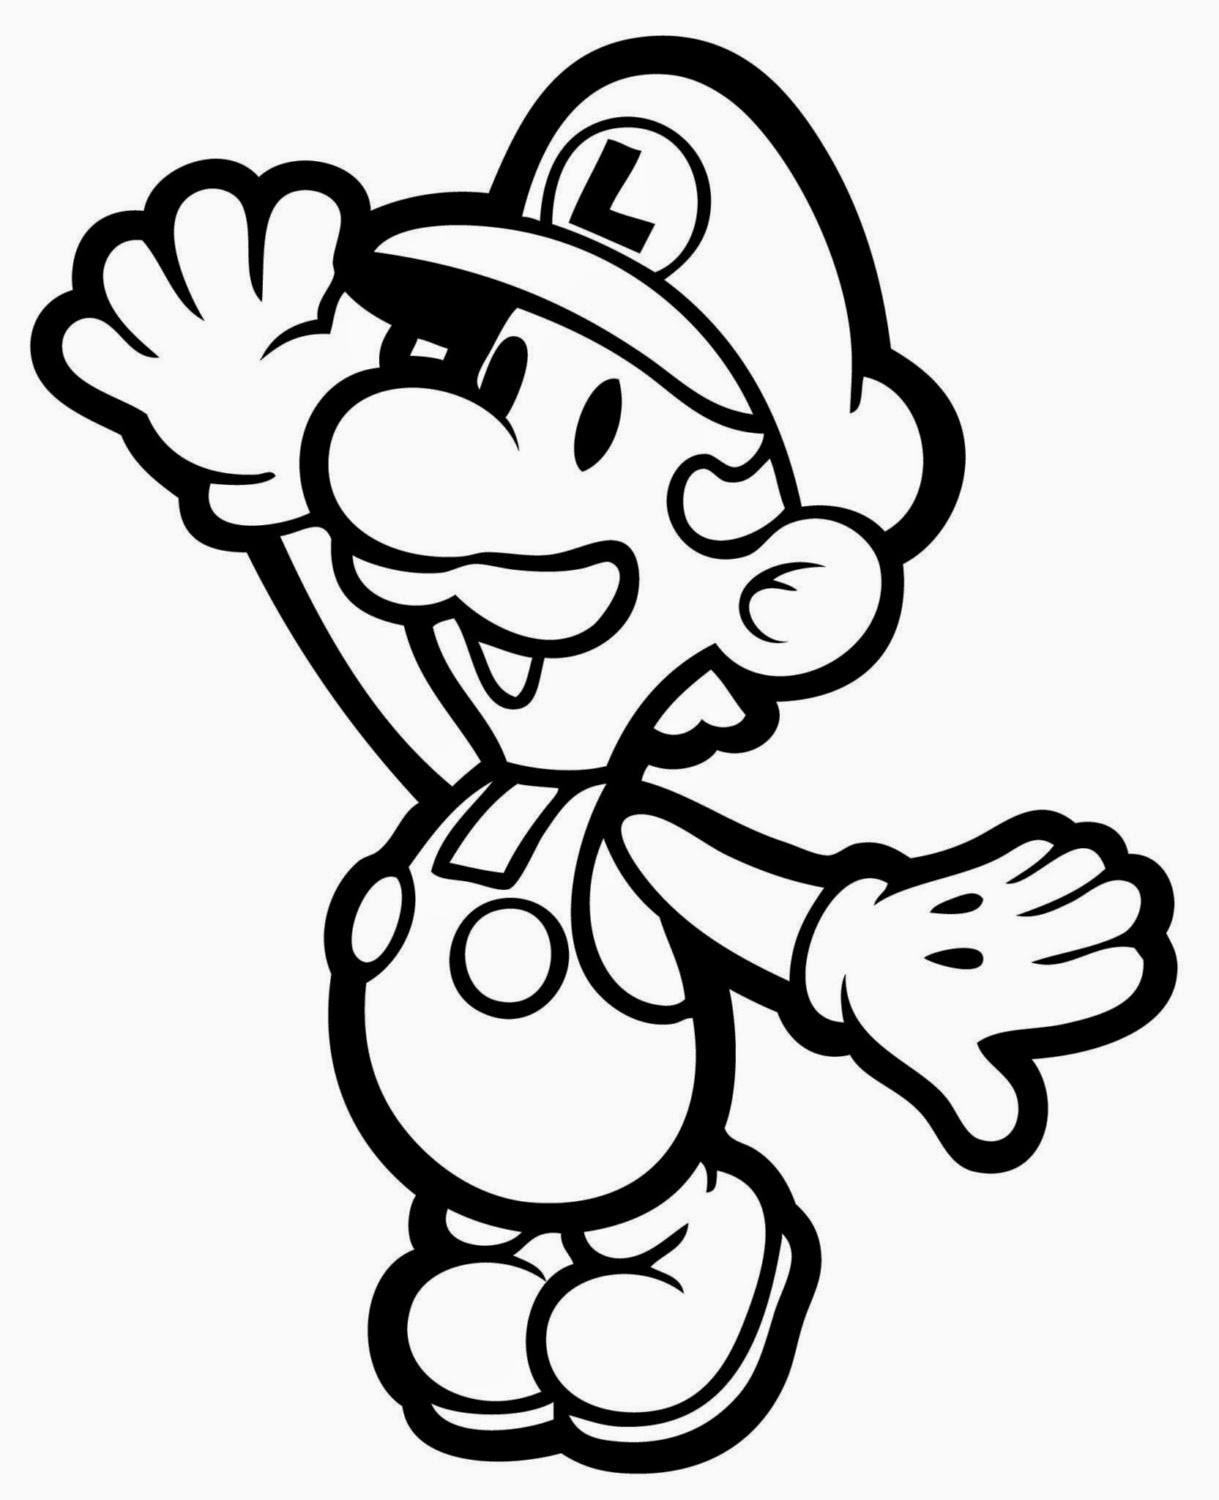 Mario Printable Coloring Pages
 Coloring Pages Mario Coloring Pages Free and Printable